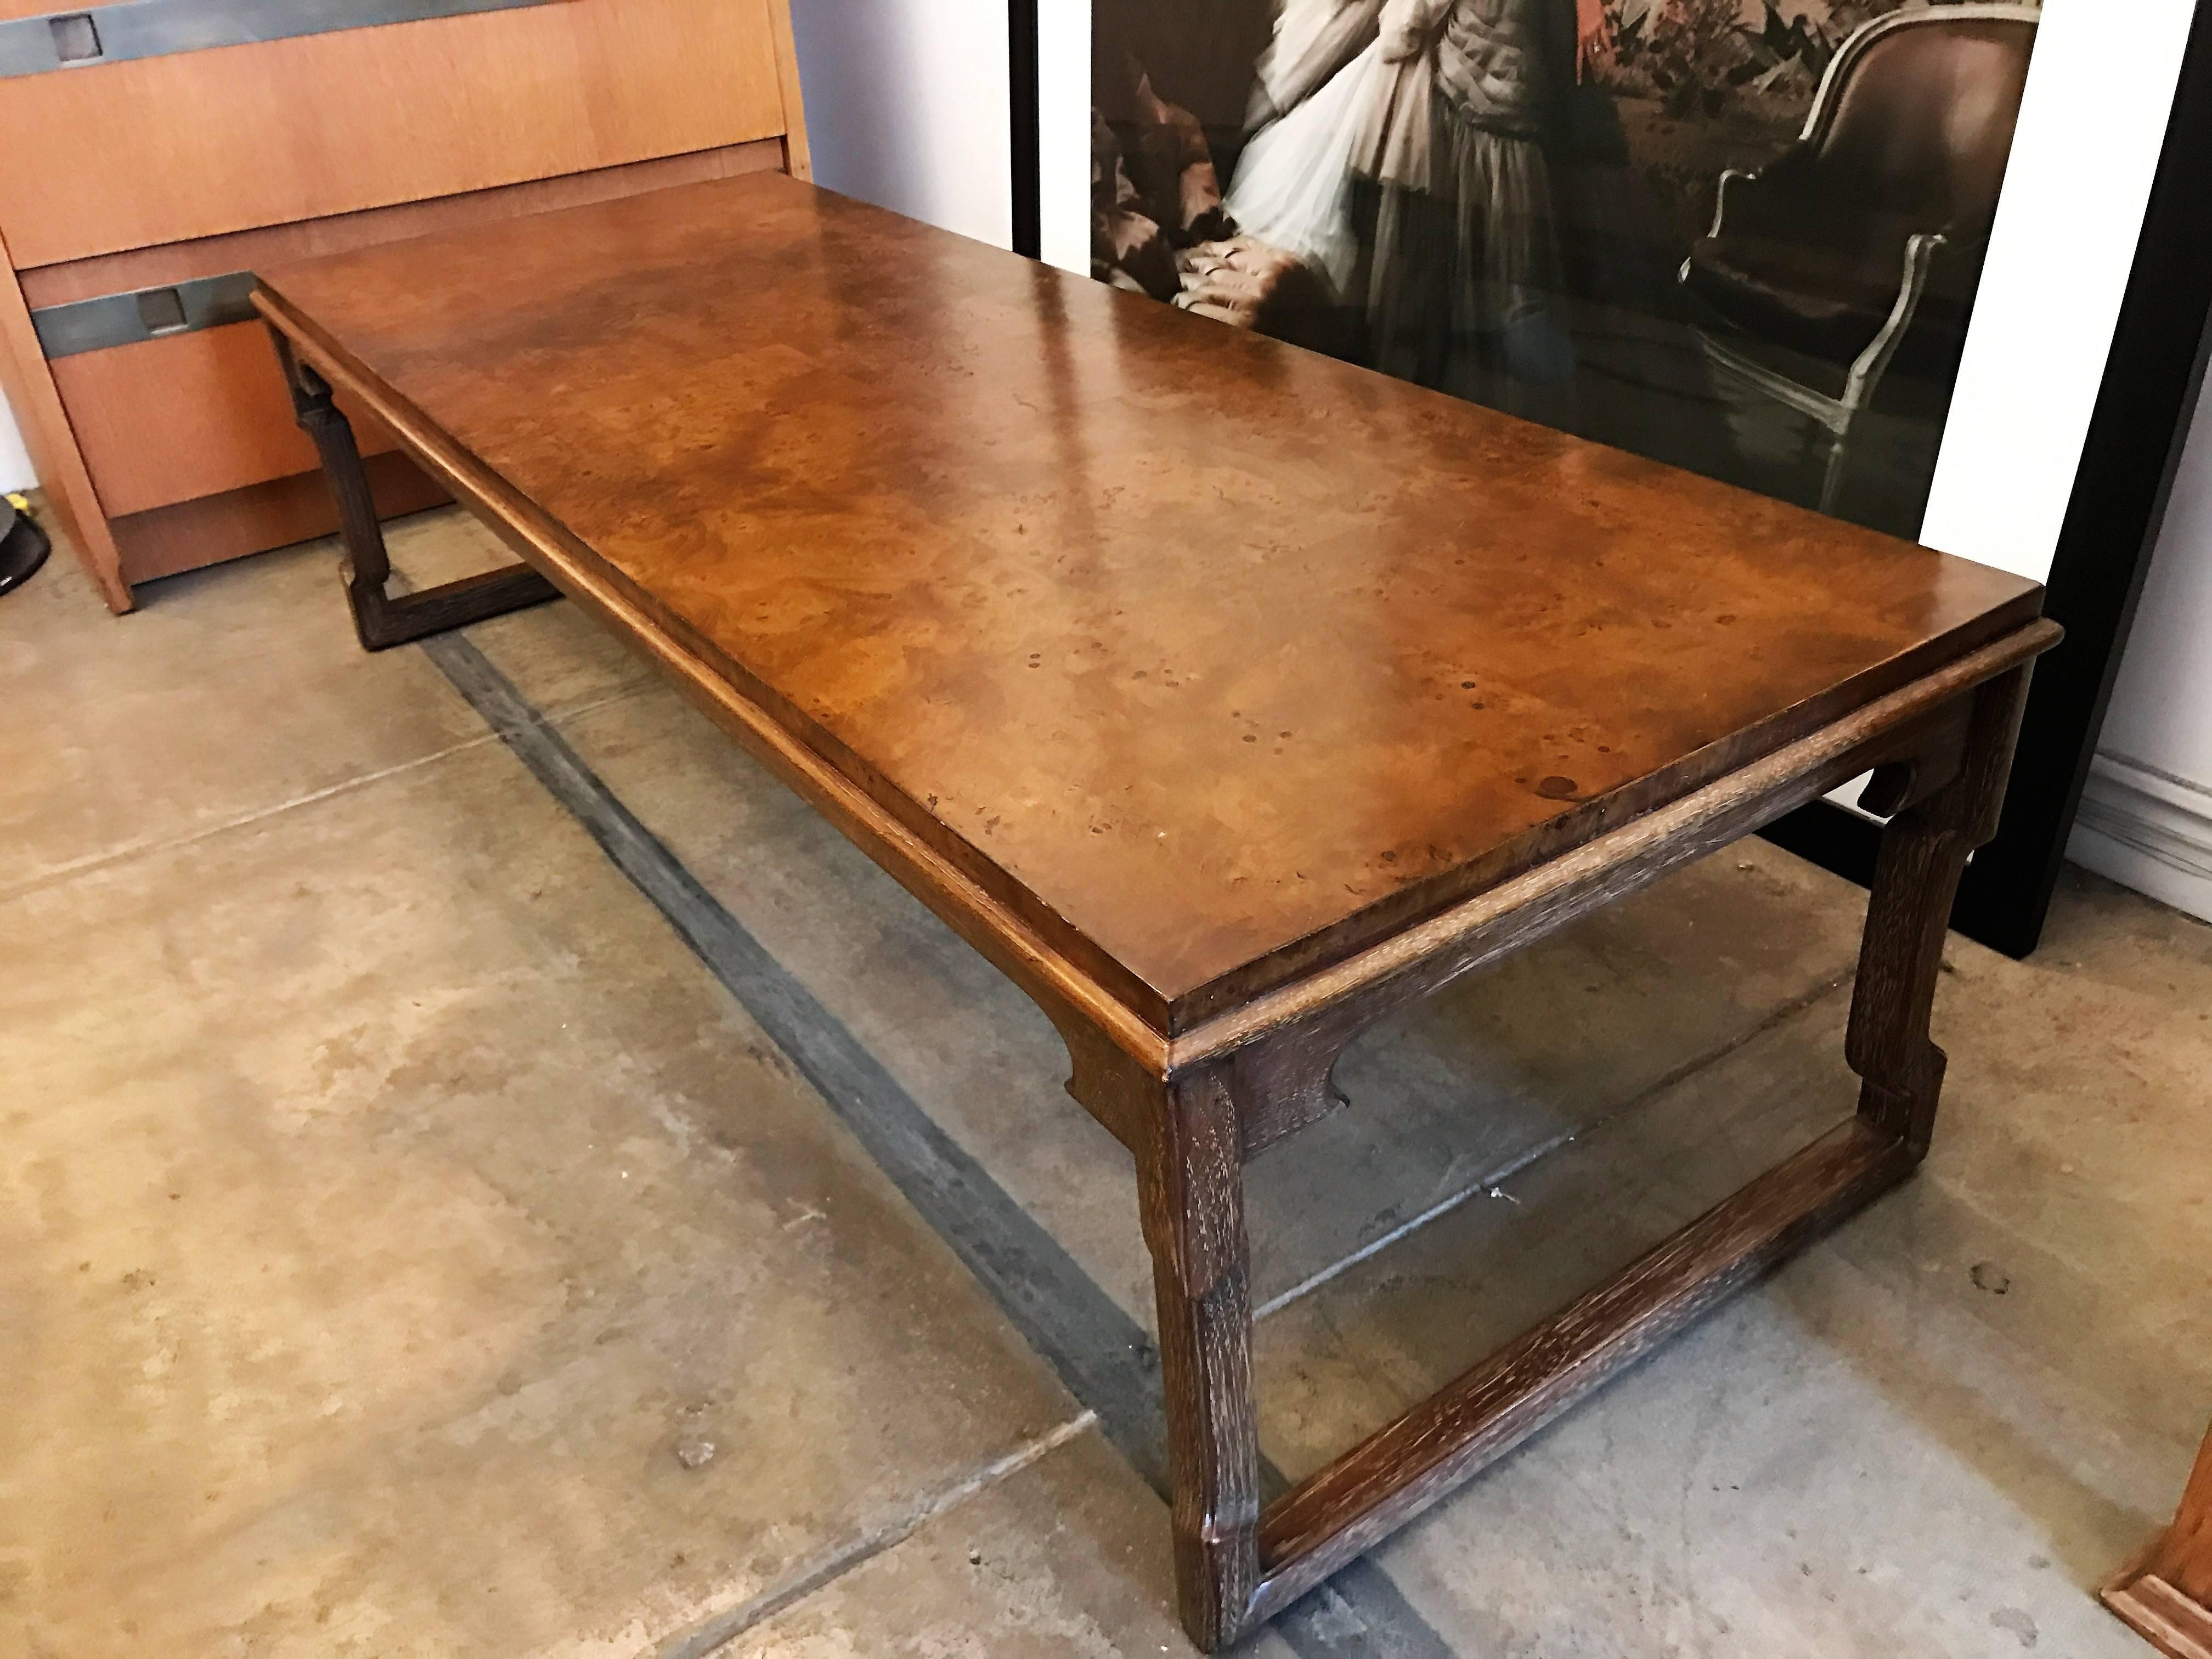 A wonderful 1960s cocktail table with a cerused limed wood base and a polished burl match-booked walnut top. Original label.